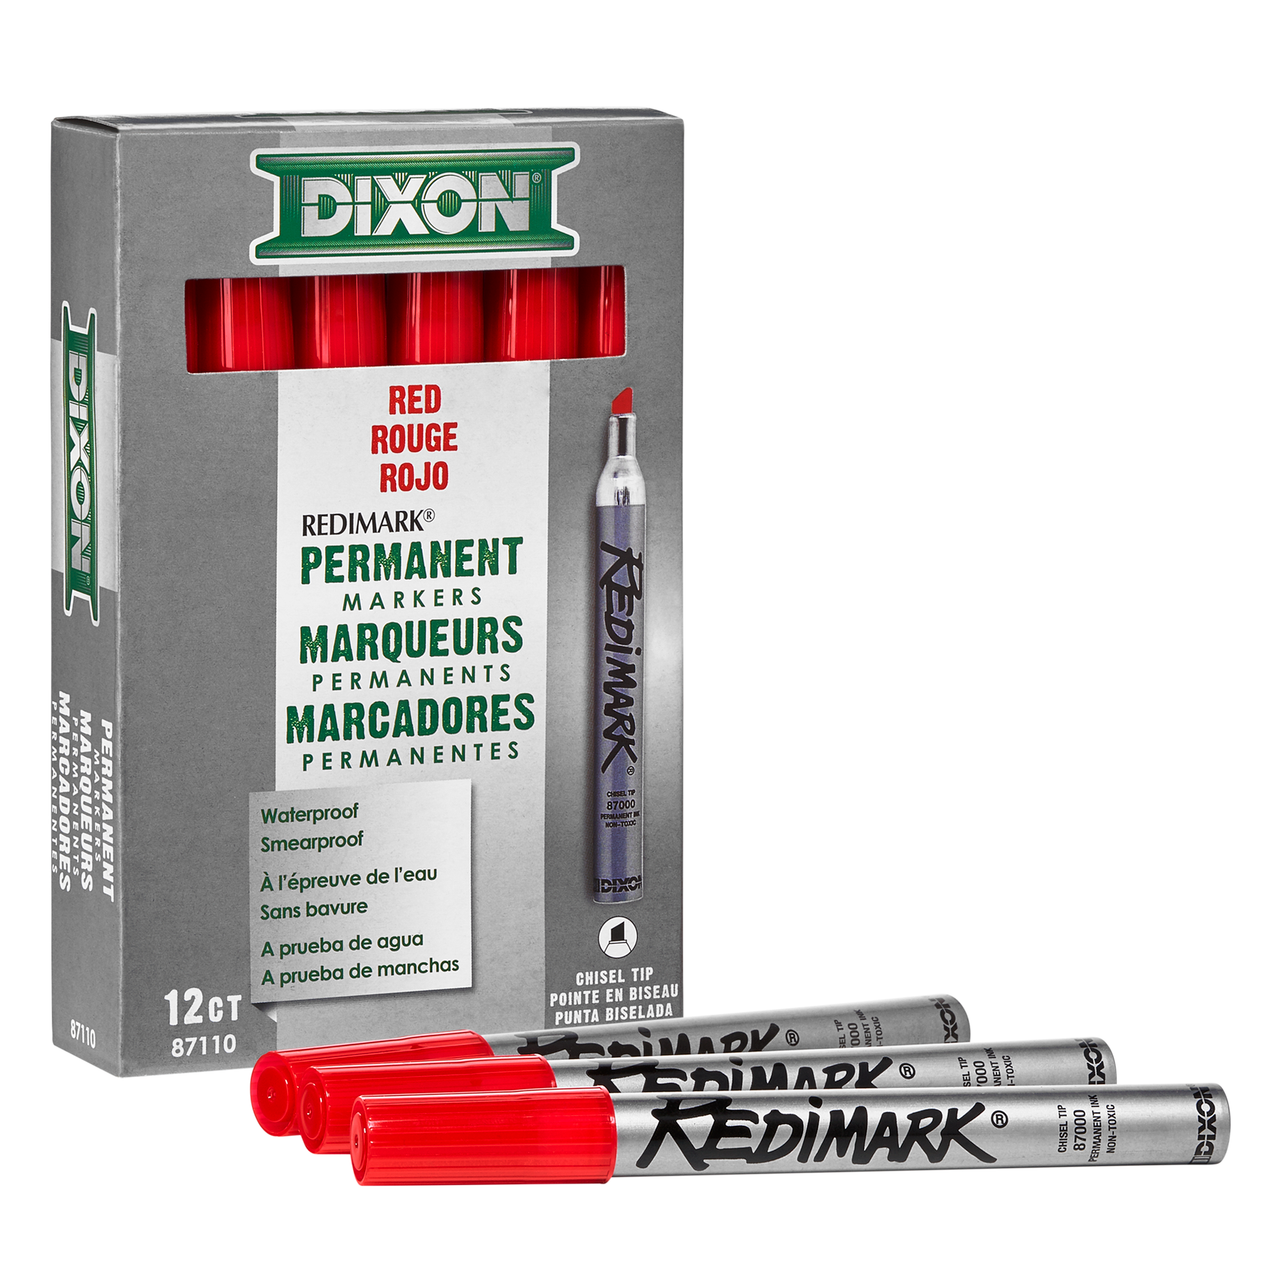 Dixon Industrial Paint Markers, Medium Tip, Box of 12 Markers, White (80229)